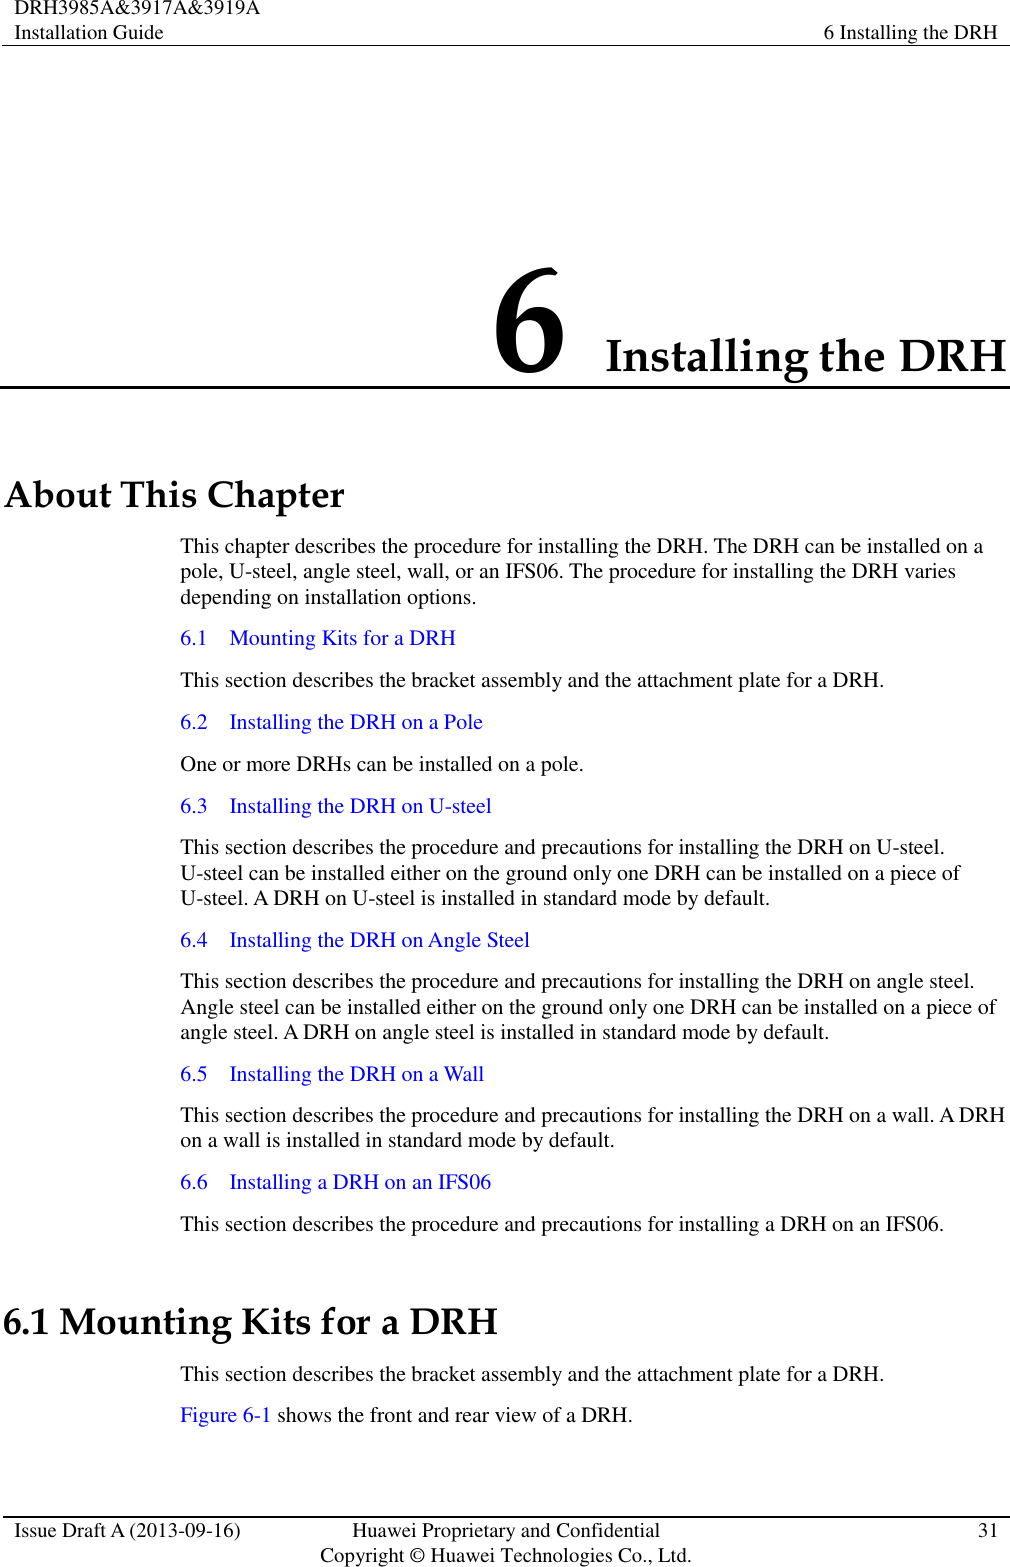 DRH3985A&amp;3917A&amp;3919A Installation Guide 6 Installing the DRH  Issue Draft A (2013-09-16) Huawei Proprietary and Confidential                                     Copyright © Huawei Technologies Co., Ltd. 31  6 Installing the DRH About This Chapter This chapter describes the procedure for installing the DRH. The DRH can be installed on a pole, U-steel, angle steel, wall, or an IFS06. The procedure for installing the DRH varies depending on installation options. 6.1    Mounting Kits for a DRH This section describes the bracket assembly and the attachment plate for a DRH. 6.2    Installing the DRH on a Pole One or more DRHs can be installed on a pole. 6.3    Installing the DRH on U-steel This section describes the procedure and precautions for installing the DRH on U-steel. U-steel can be installed either on the ground only one DRH can be installed on a piece of U-steel. A DRH on U-steel is installed in standard mode by default. 6.4    Installing the DRH on Angle Steel This section describes the procedure and precautions for installing the DRH on angle steel. Angle steel can be installed either on the ground only one DRH can be installed on a piece of angle steel. A DRH on angle steel is installed in standard mode by default. 6.5    Installing the DRH on a Wall This section describes the procedure and precautions for installing the DRH on a wall. A DRH on a wall is installed in standard mode by default. 6.6    Installing a DRH on an IFS06 This section describes the procedure and precautions for installing a DRH on an IFS06. 6.1 Mounting Kits for a DRH This section describes the bracket assembly and the attachment plate for a DRH. Figure 6-1 shows the front and rear view of a DRH. 